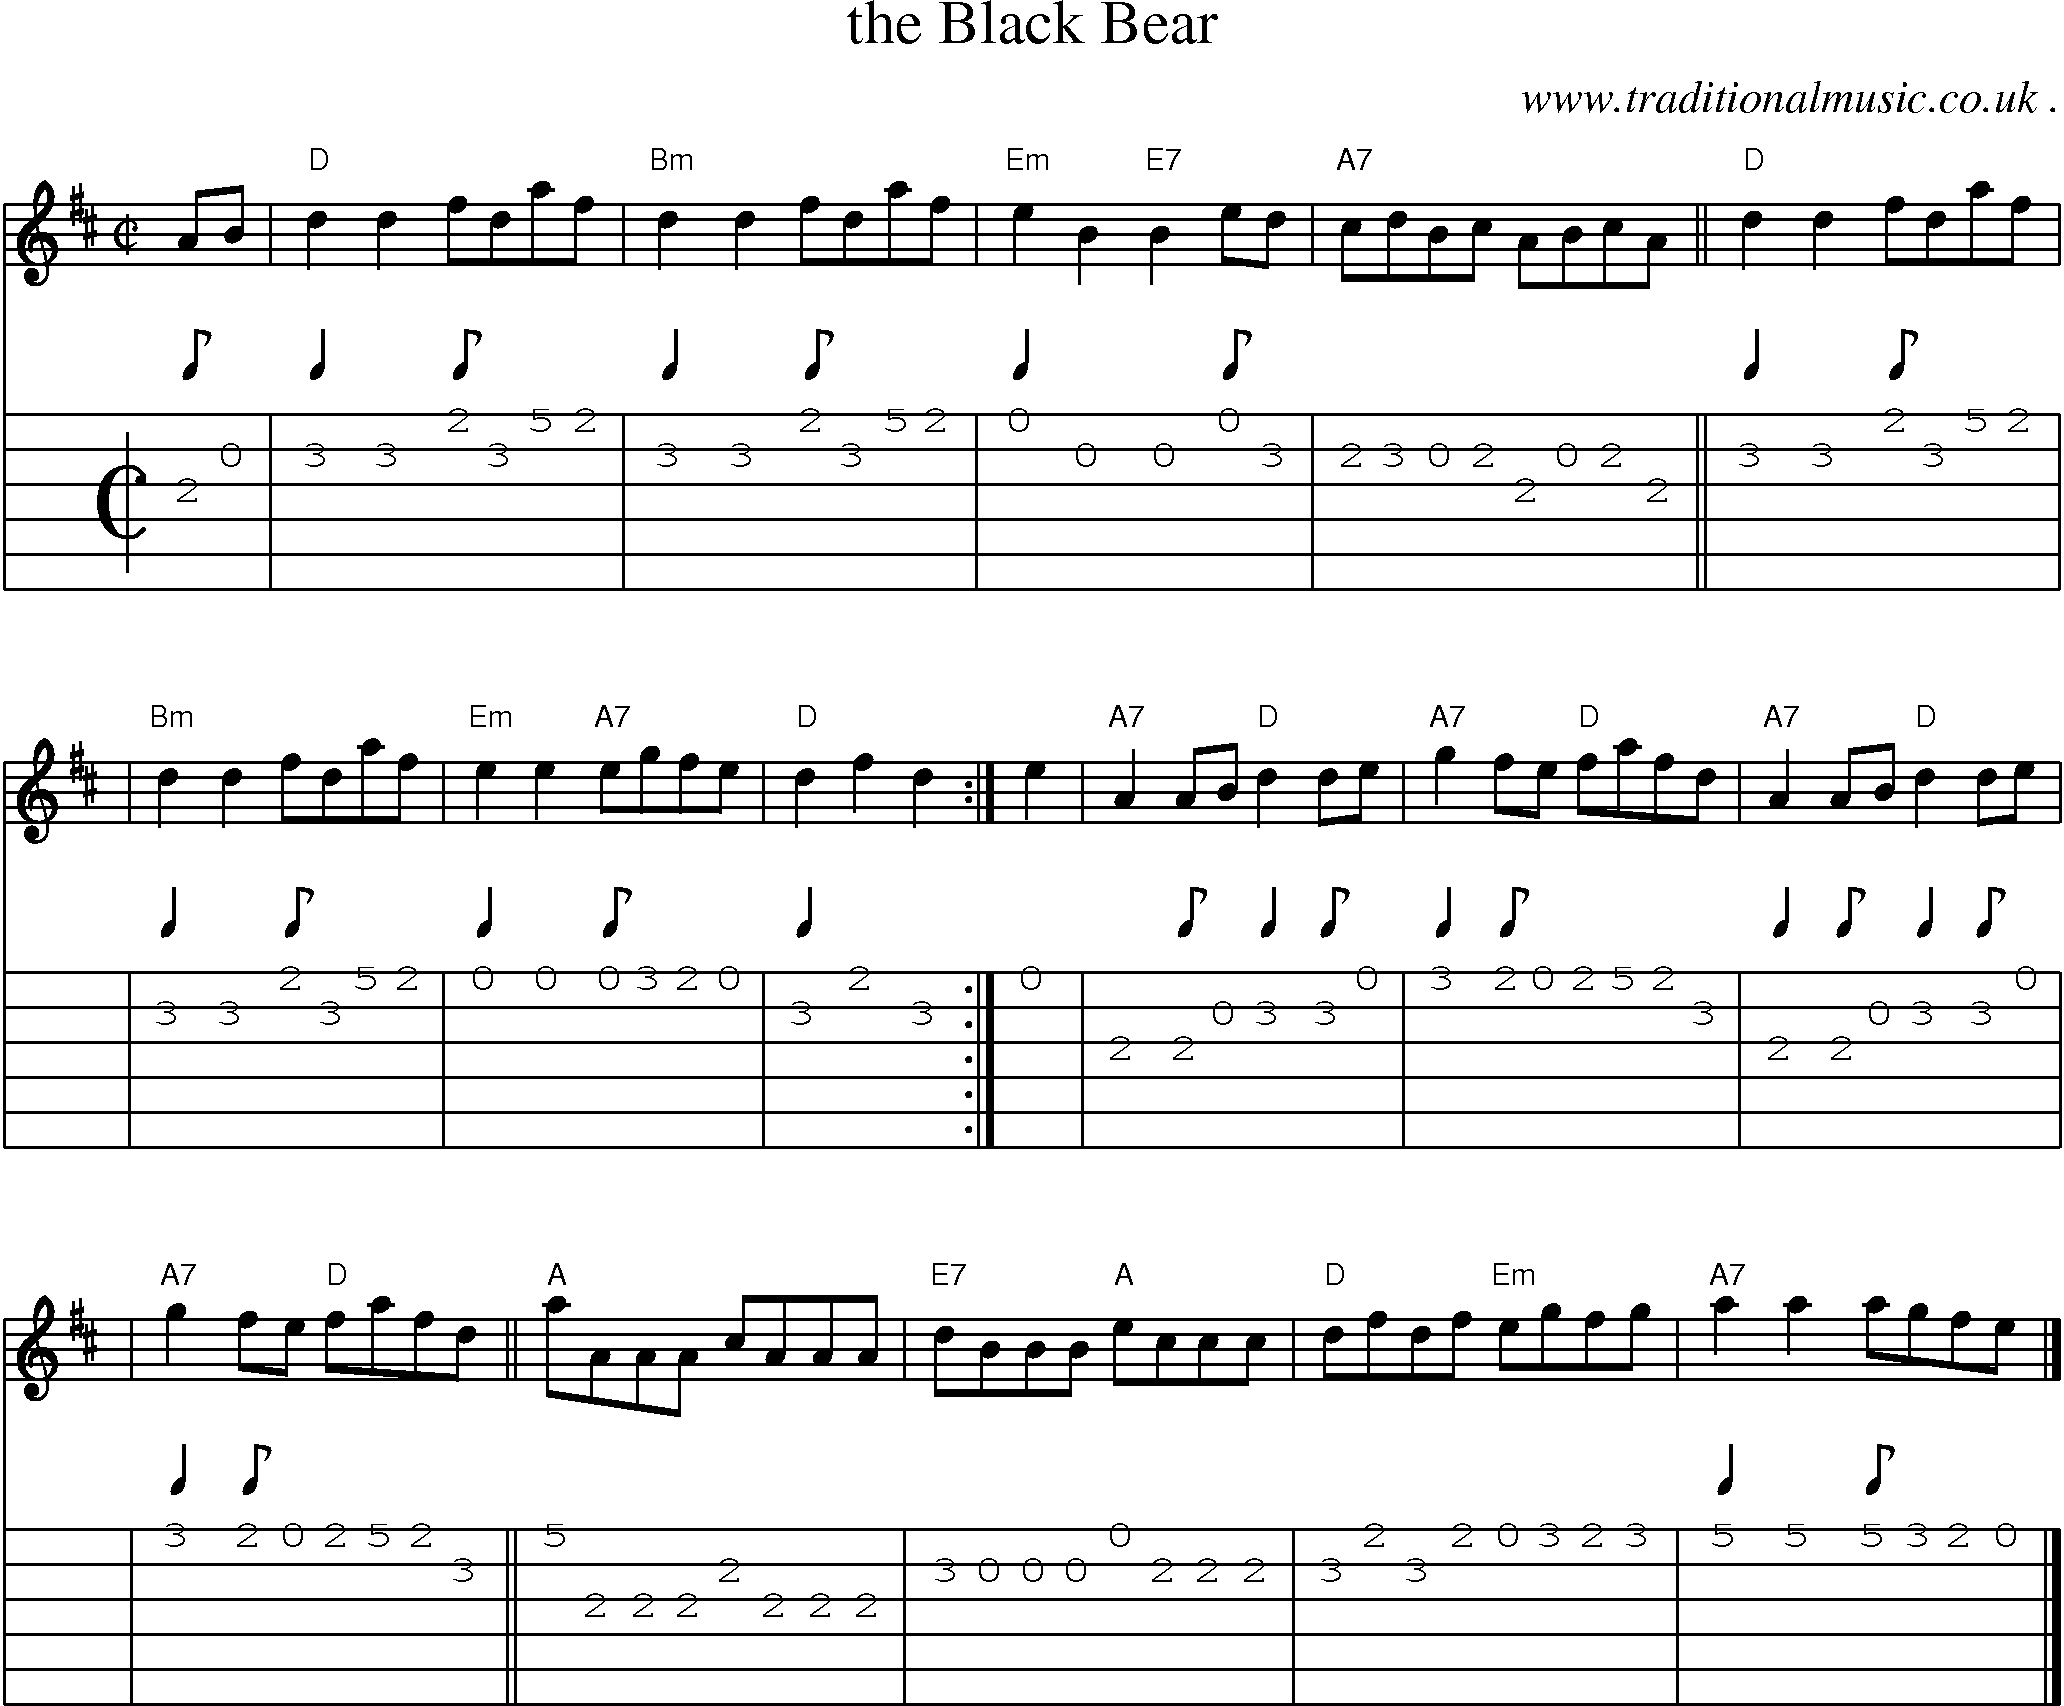 Sheet-music  score, Chords and Guitar Tabs for The Black Bear